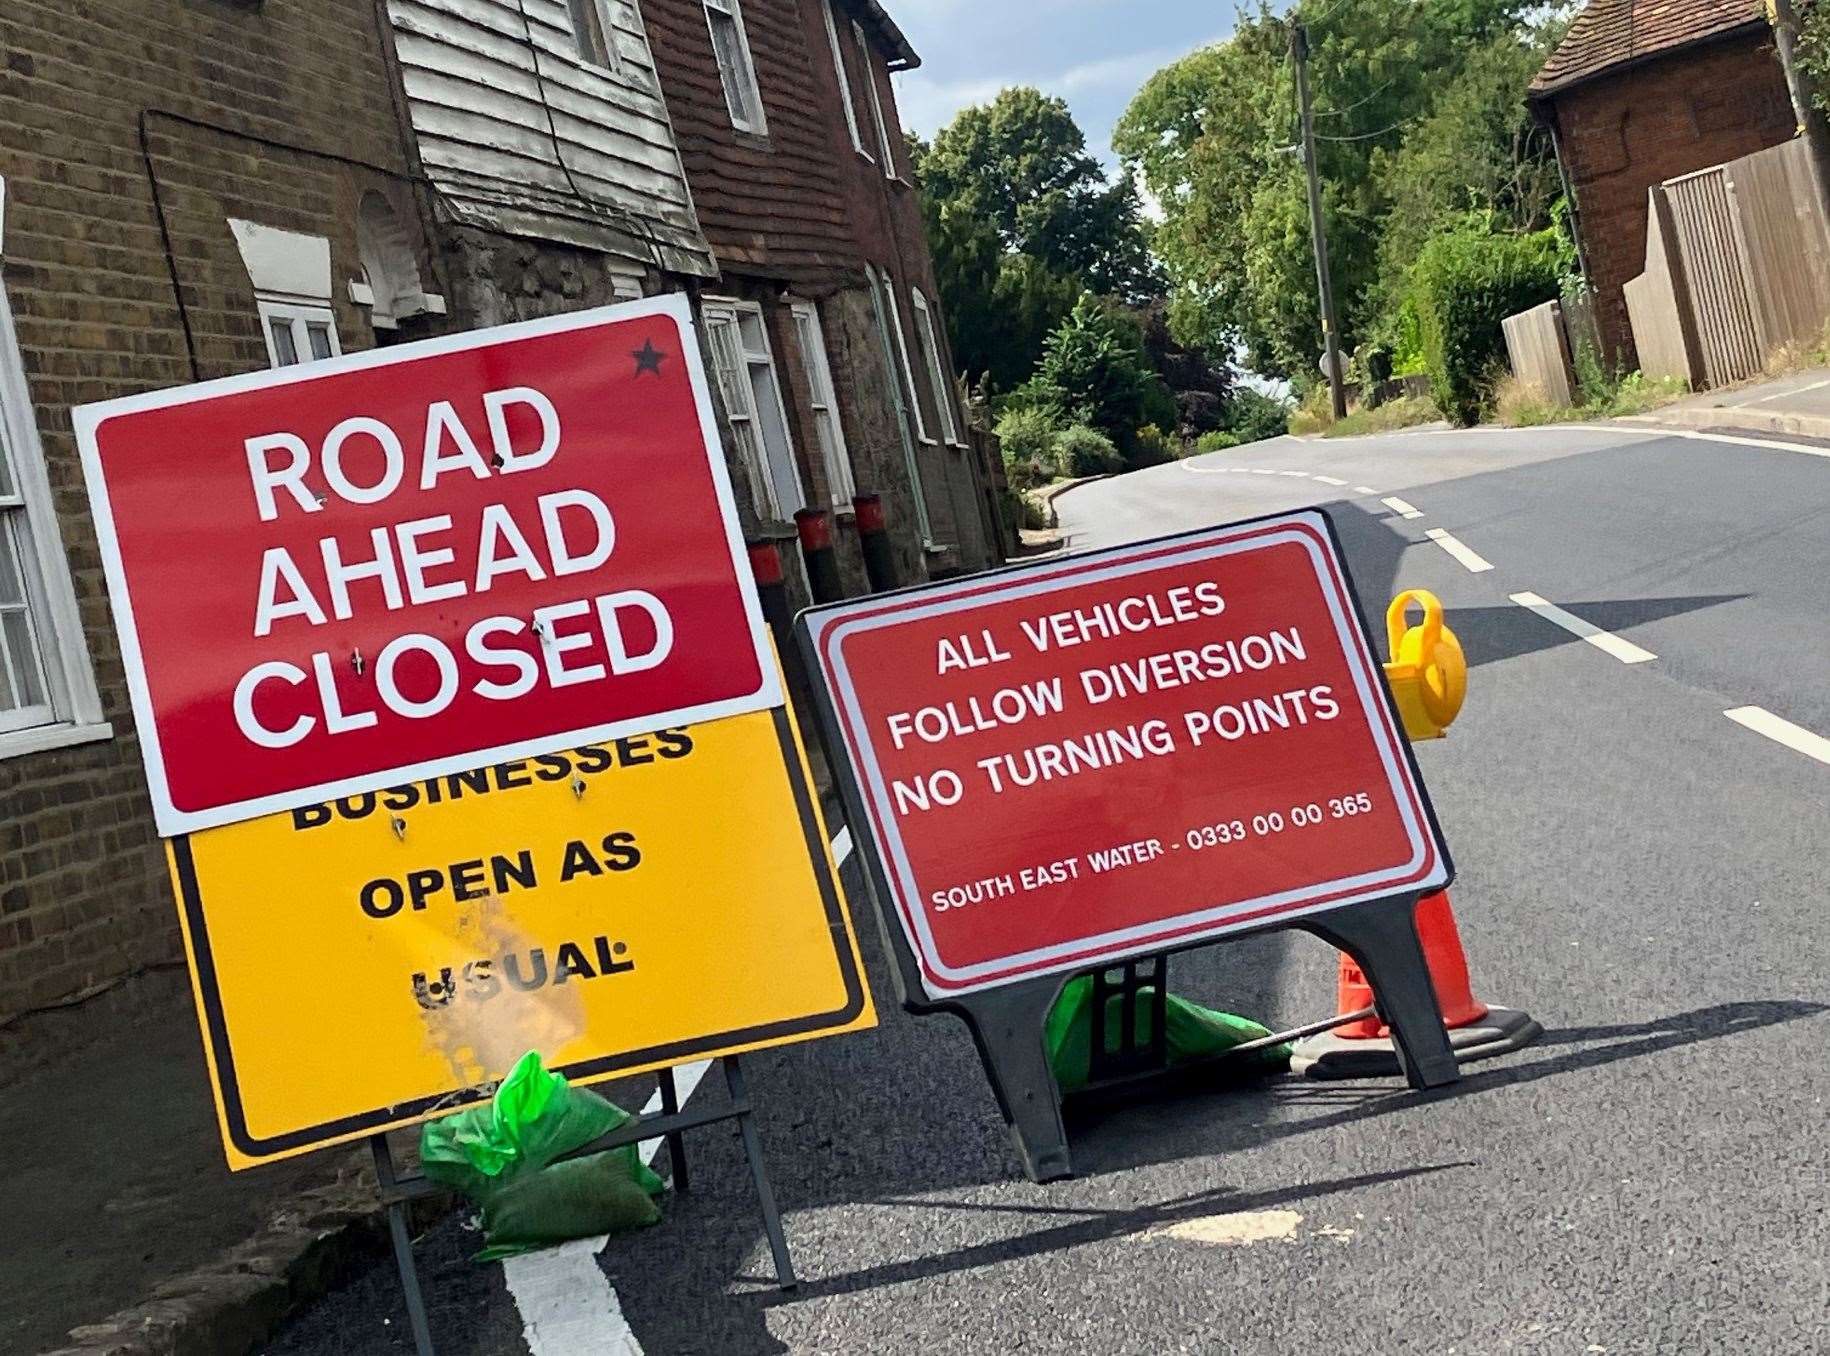 The South East Water closure of Upper Street in Leeds, near Maidstone